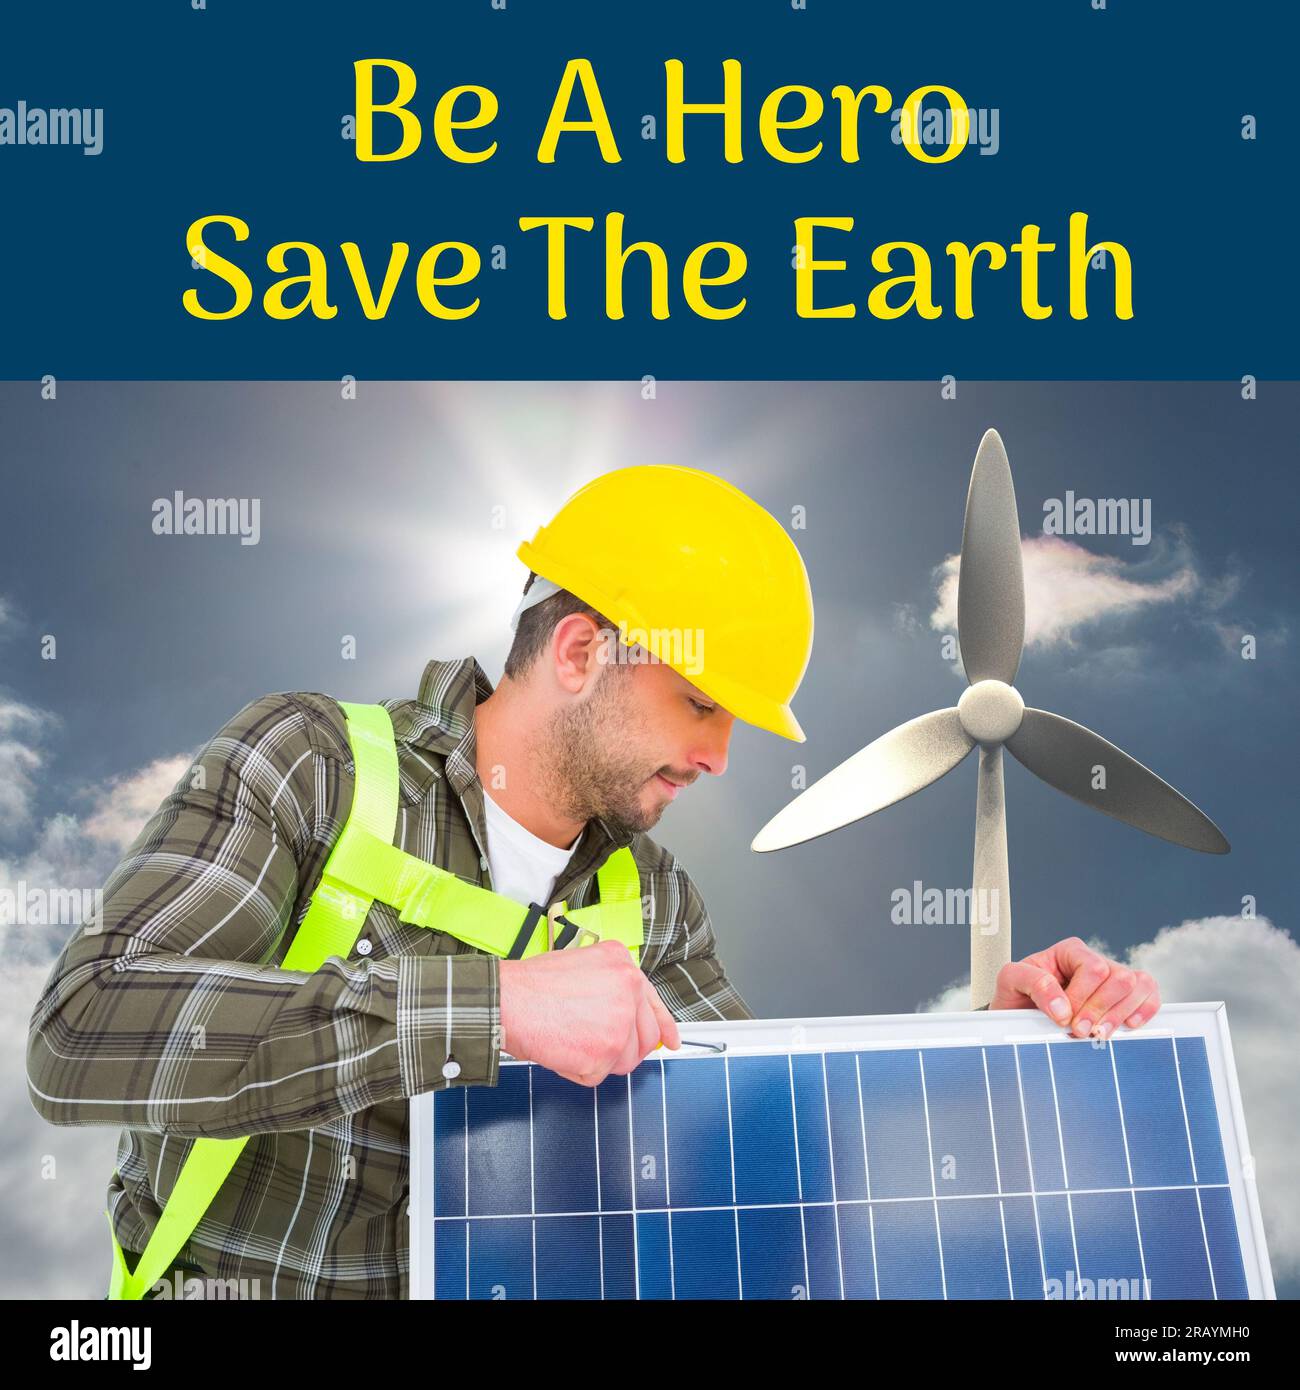 Composition of be a hero save the earth text over caucasian man with solar panel and wind turbine Stock Photo